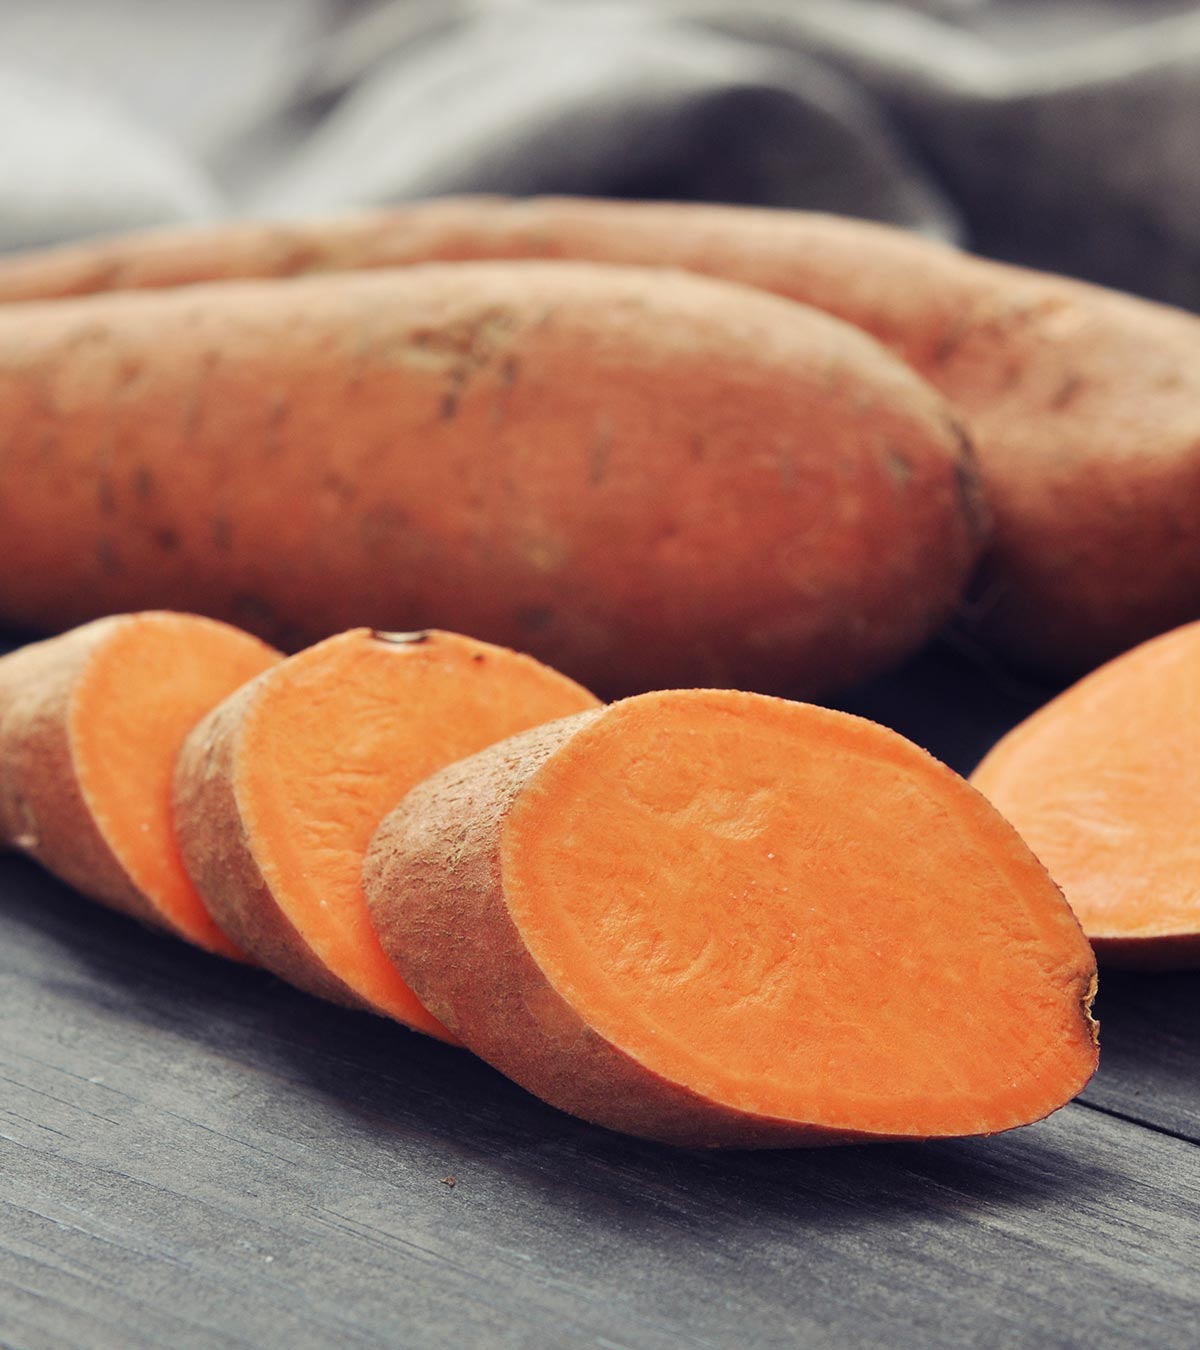 Sweet Potato For Baby: Its Benefits And 12 Tasty Recipes To Try